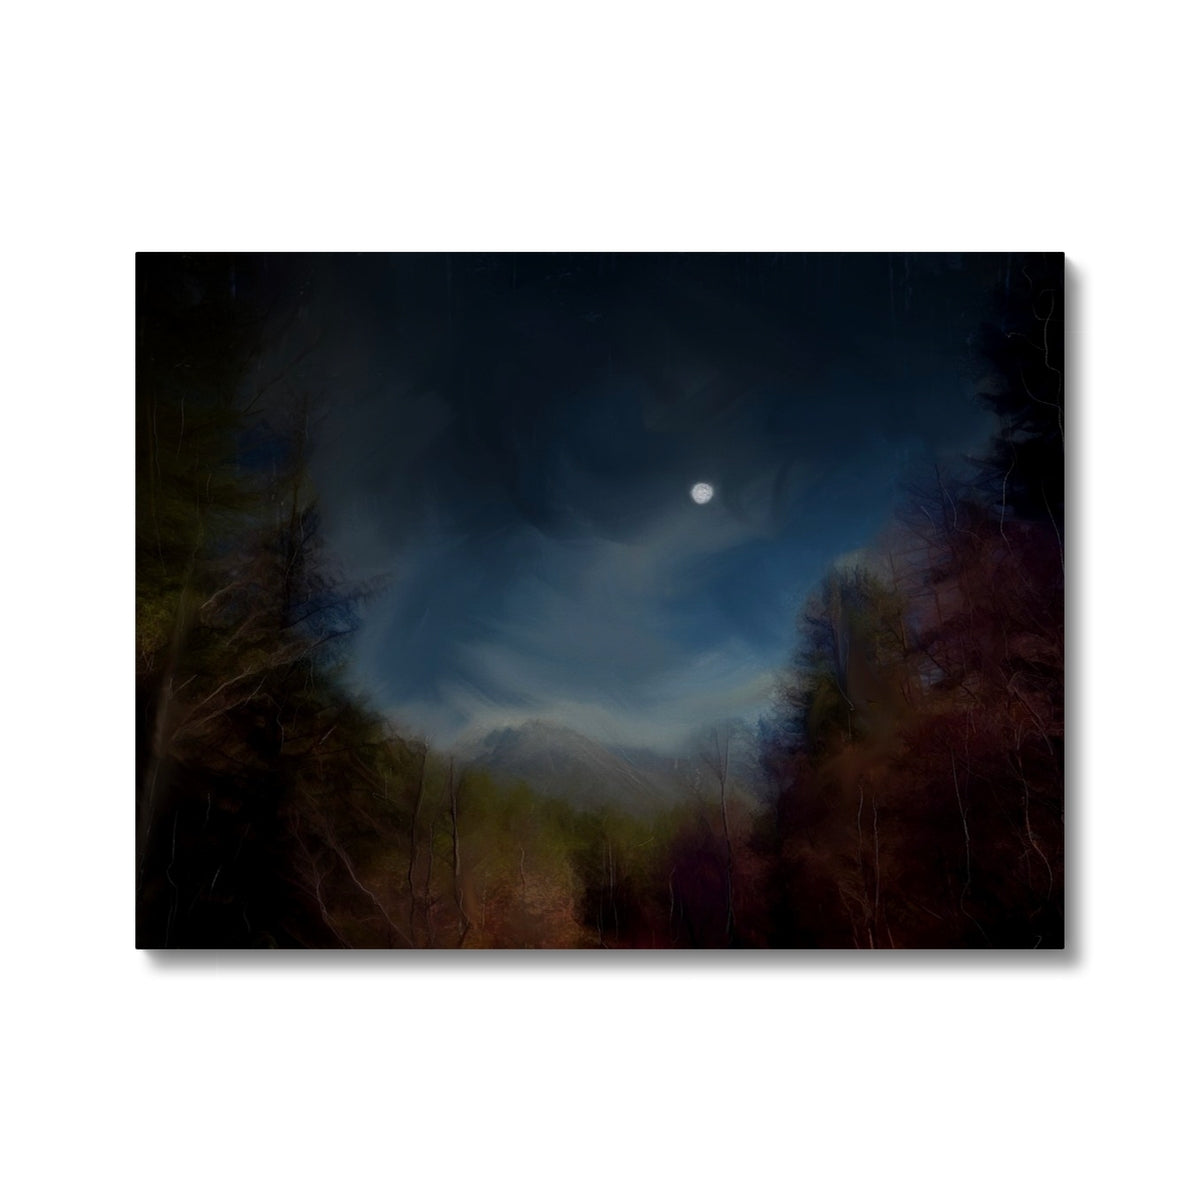 Glencoe Lochan Moonlight Painting | Canvas From Scotland-Contemporary Stretched Canvas Prints-Scottish Lochs & Mountains Art Gallery-24"x18"-Paintings, Prints, Homeware, Art Gifts From Scotland By Scottish Artist Kevin Hunter